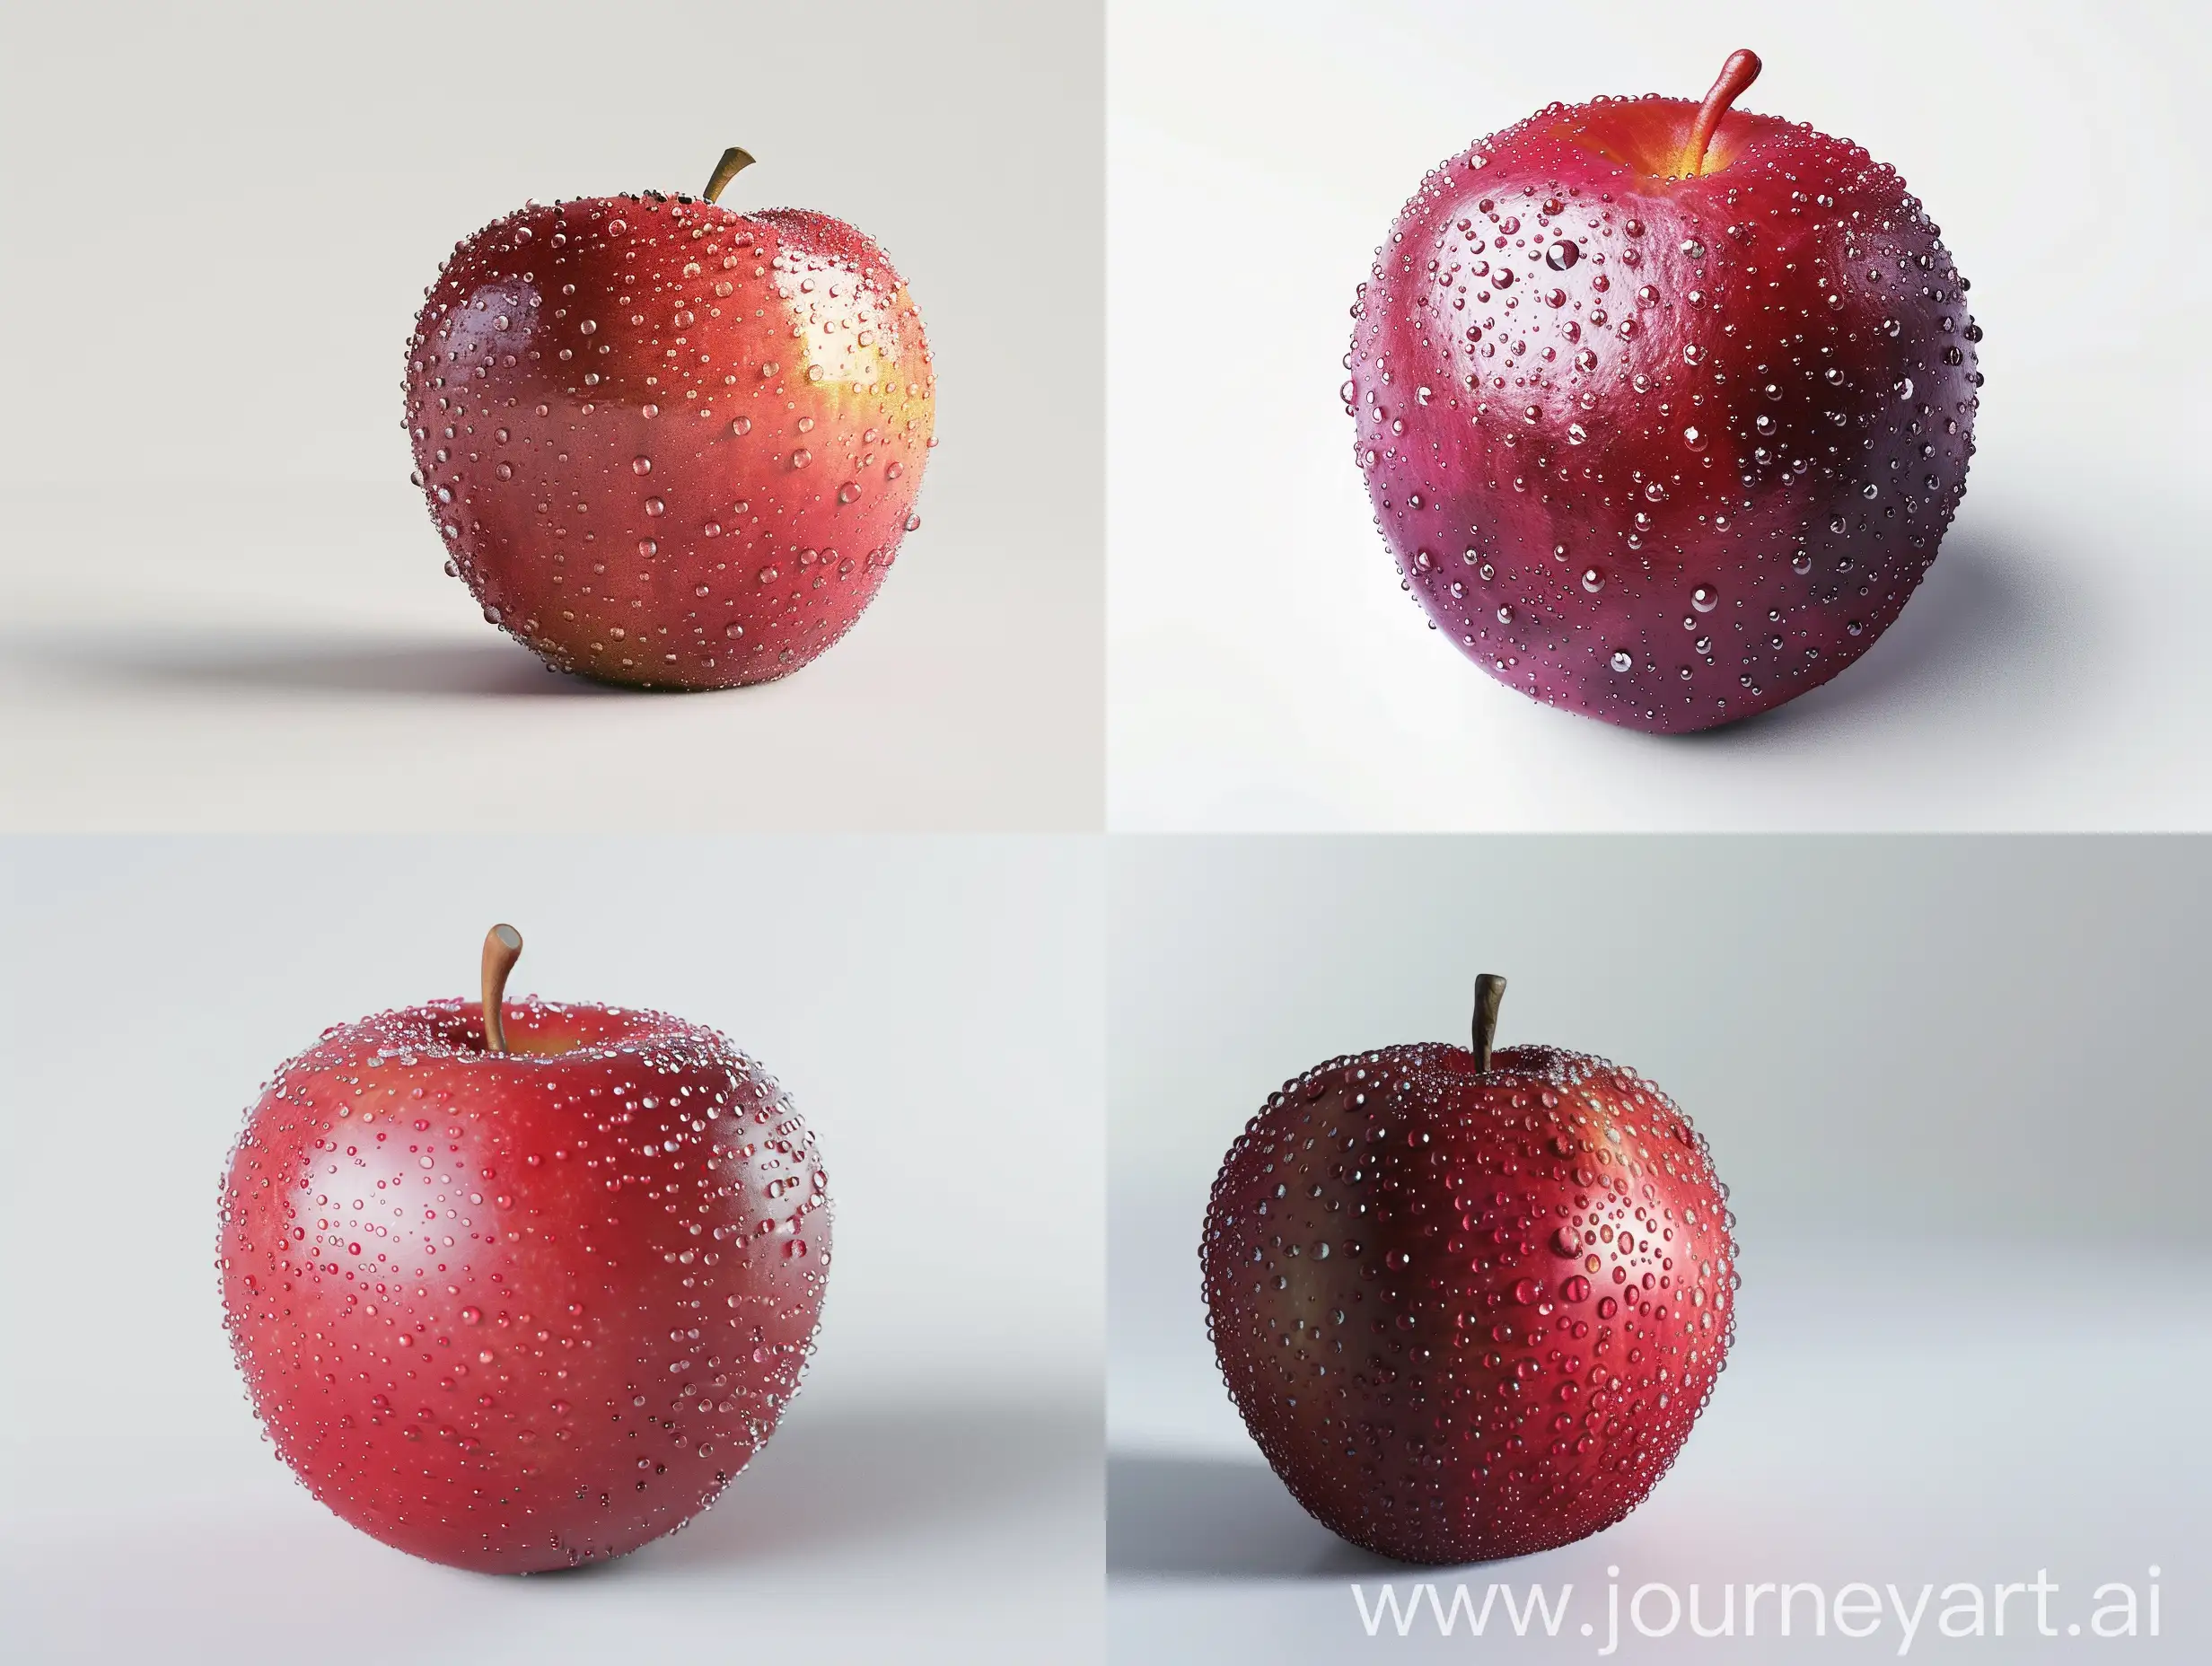 A realistic 3D render of a red apple with water droplets, on a white seamless background --ar 4:3